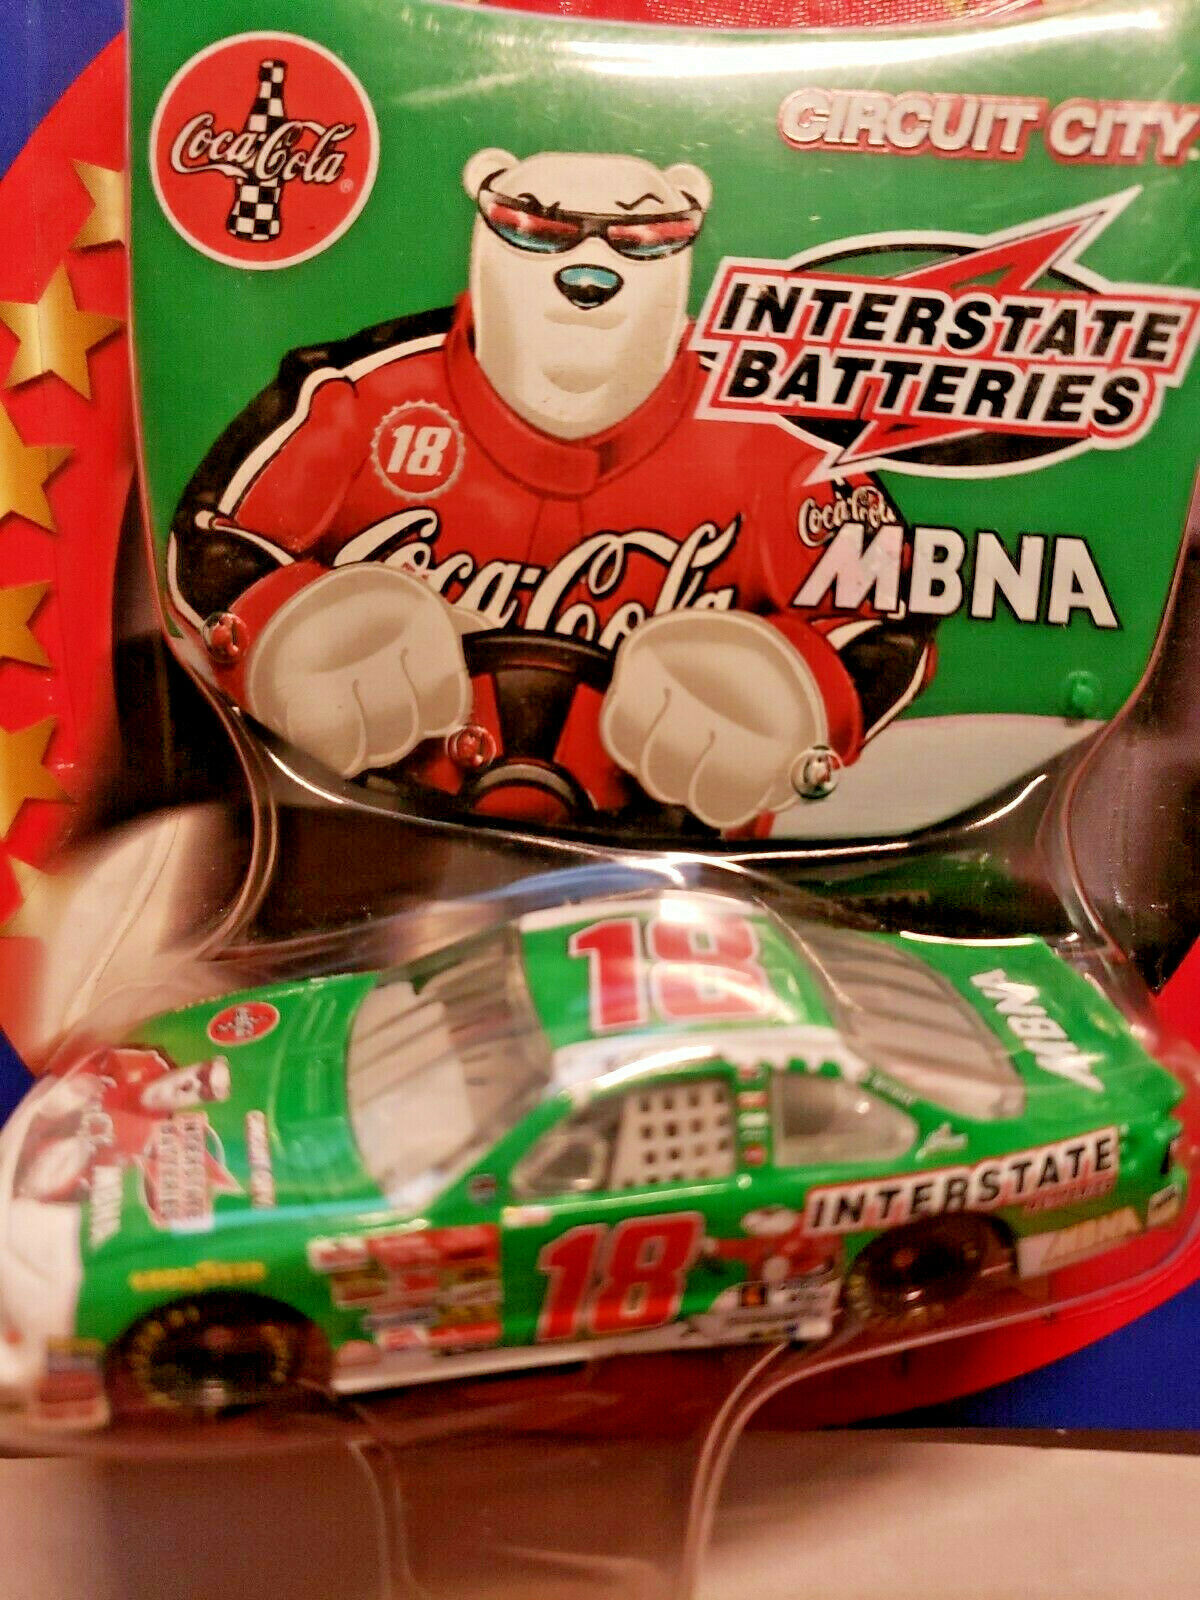 Bobby Labonte #18 Interstate Batteries and 13 similar items